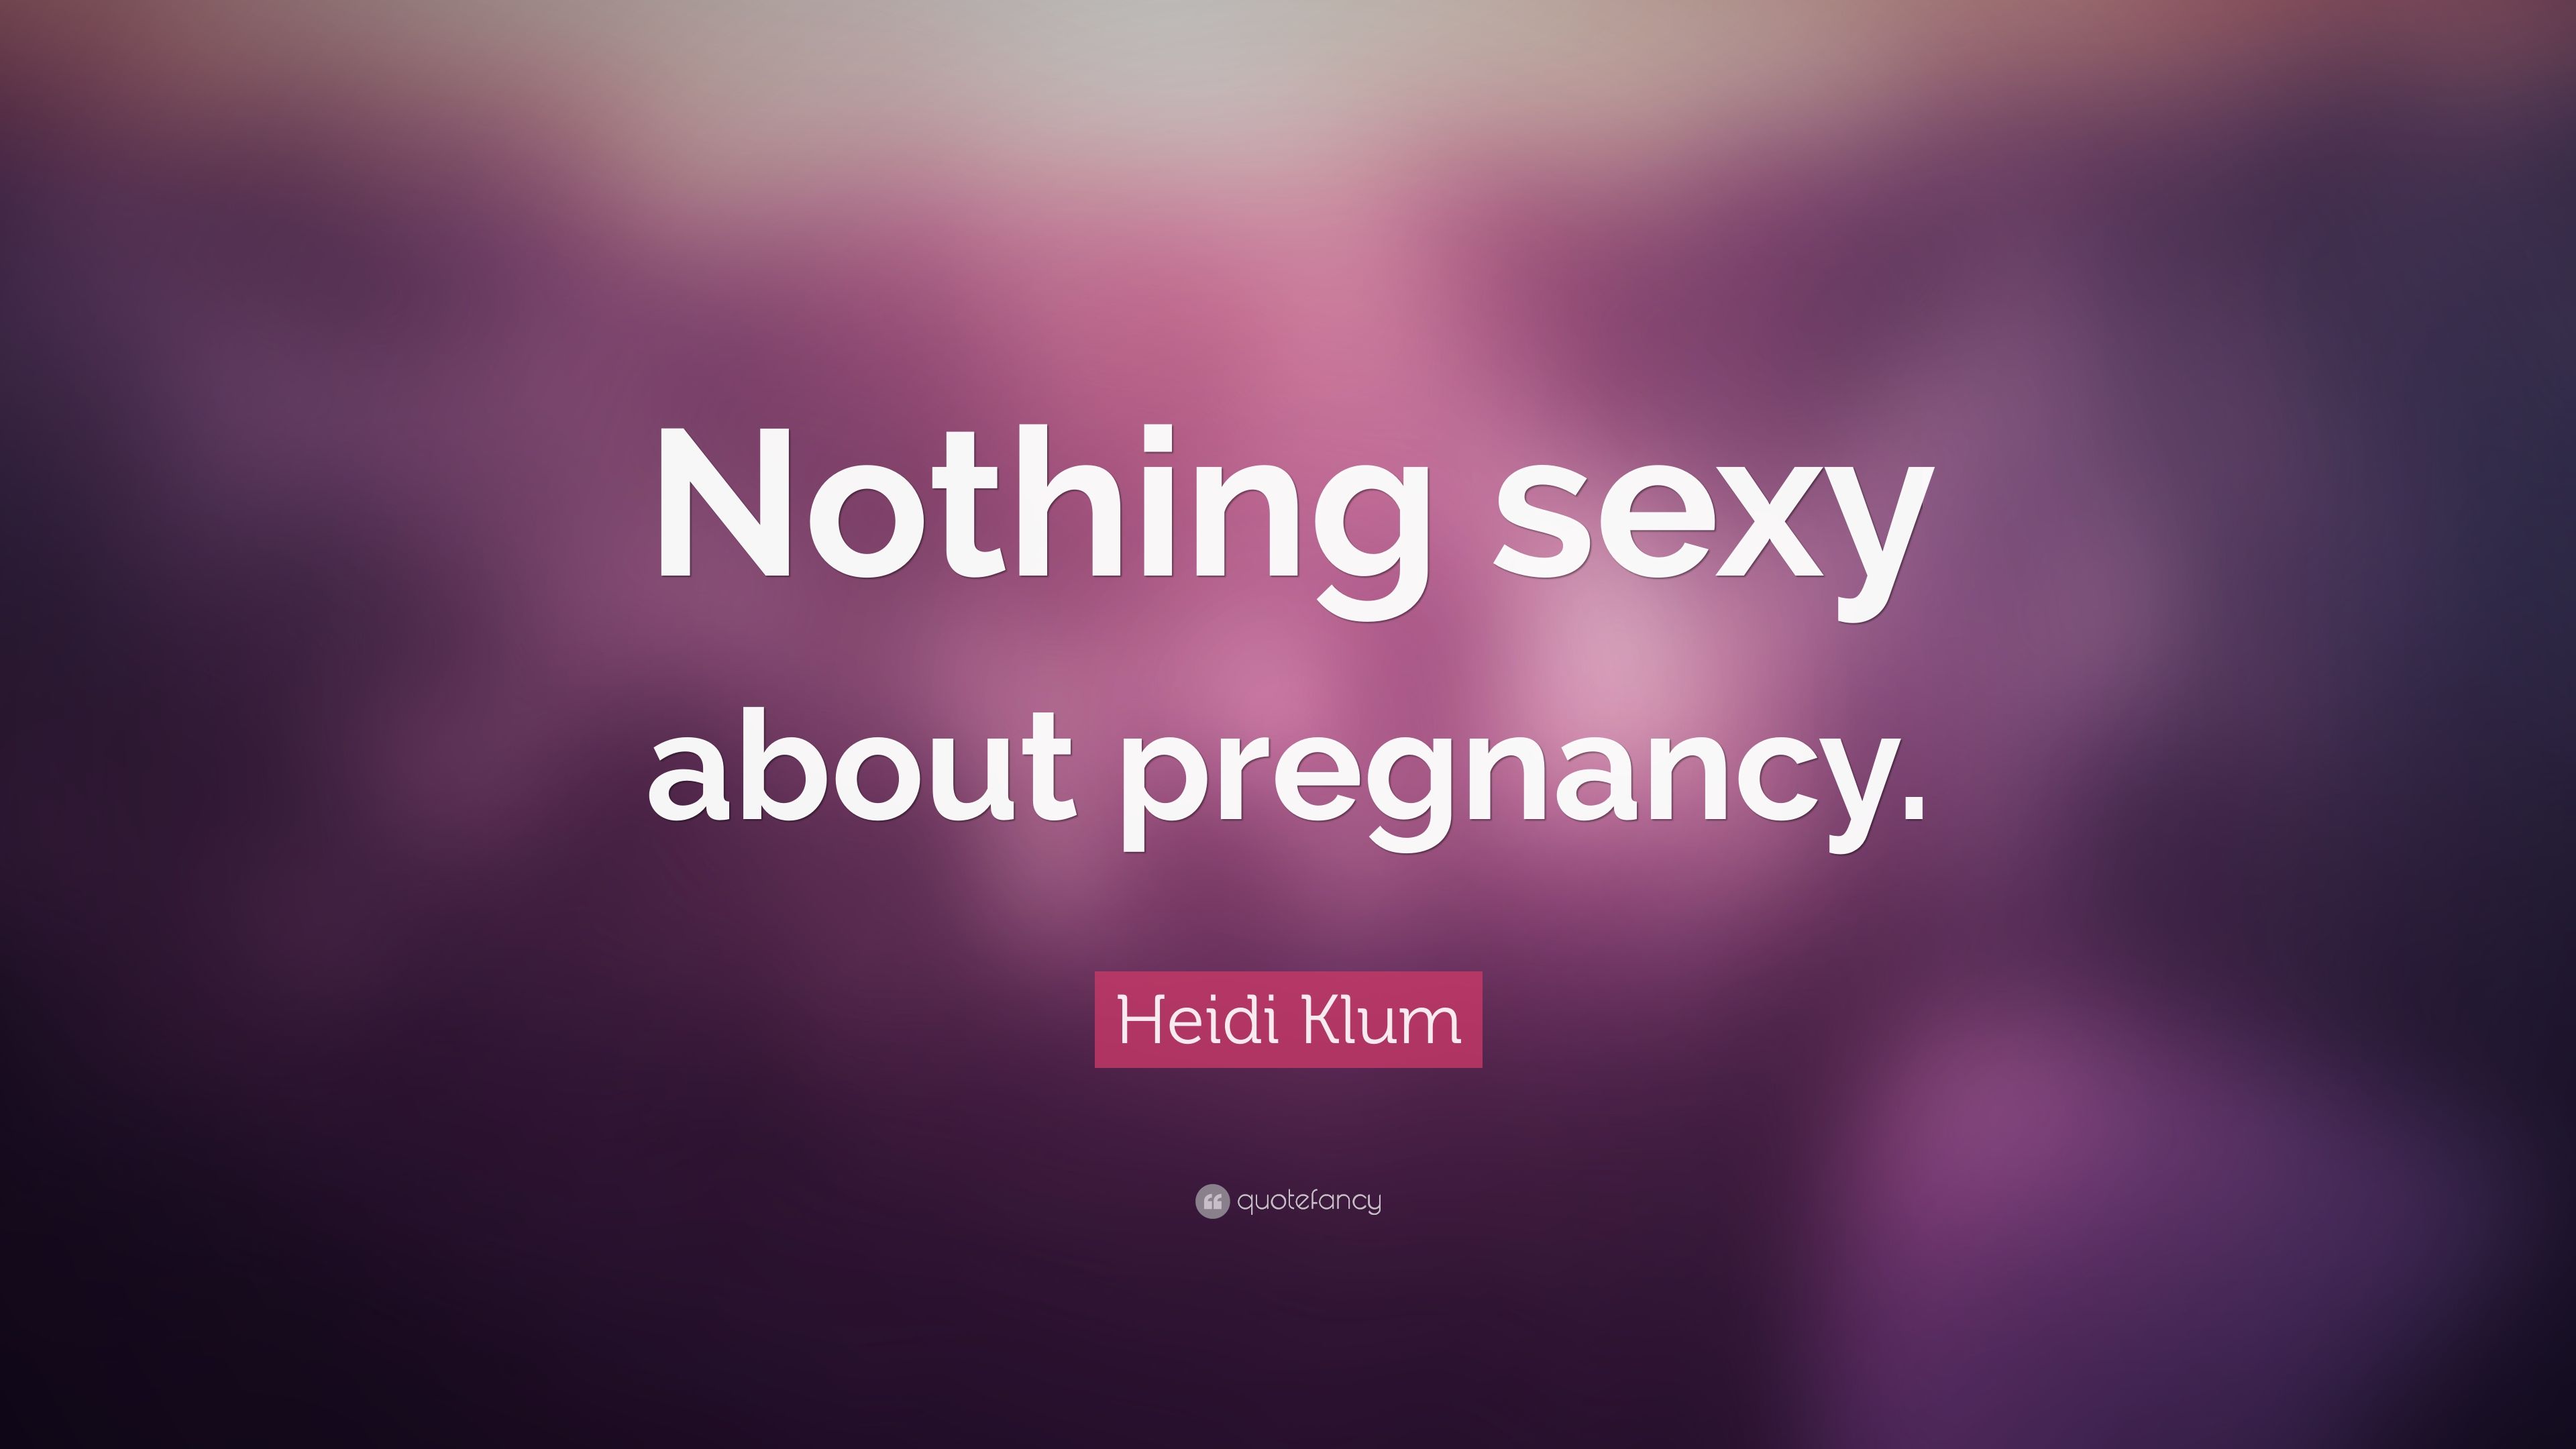 Heidi Klum Quote: “Nothing about pregnancy.” 7 wallpaper